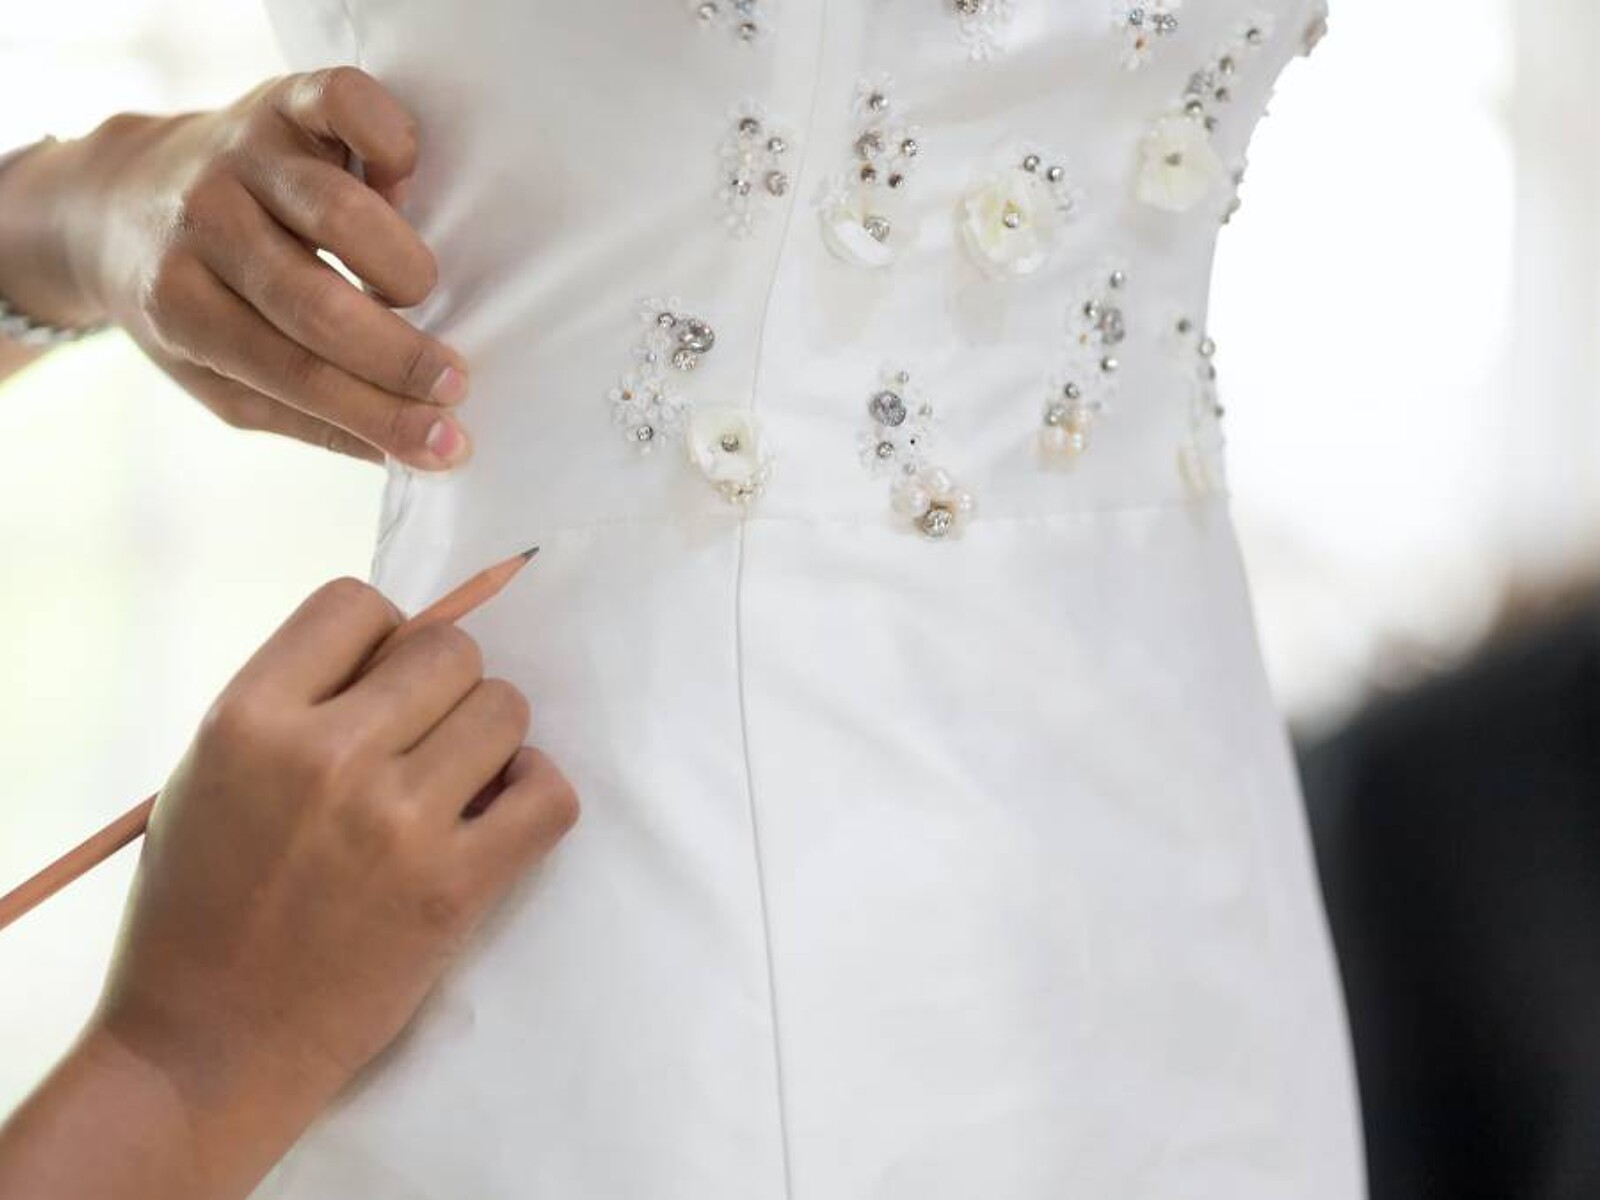 Wedding Dress Alterations Cost Guide